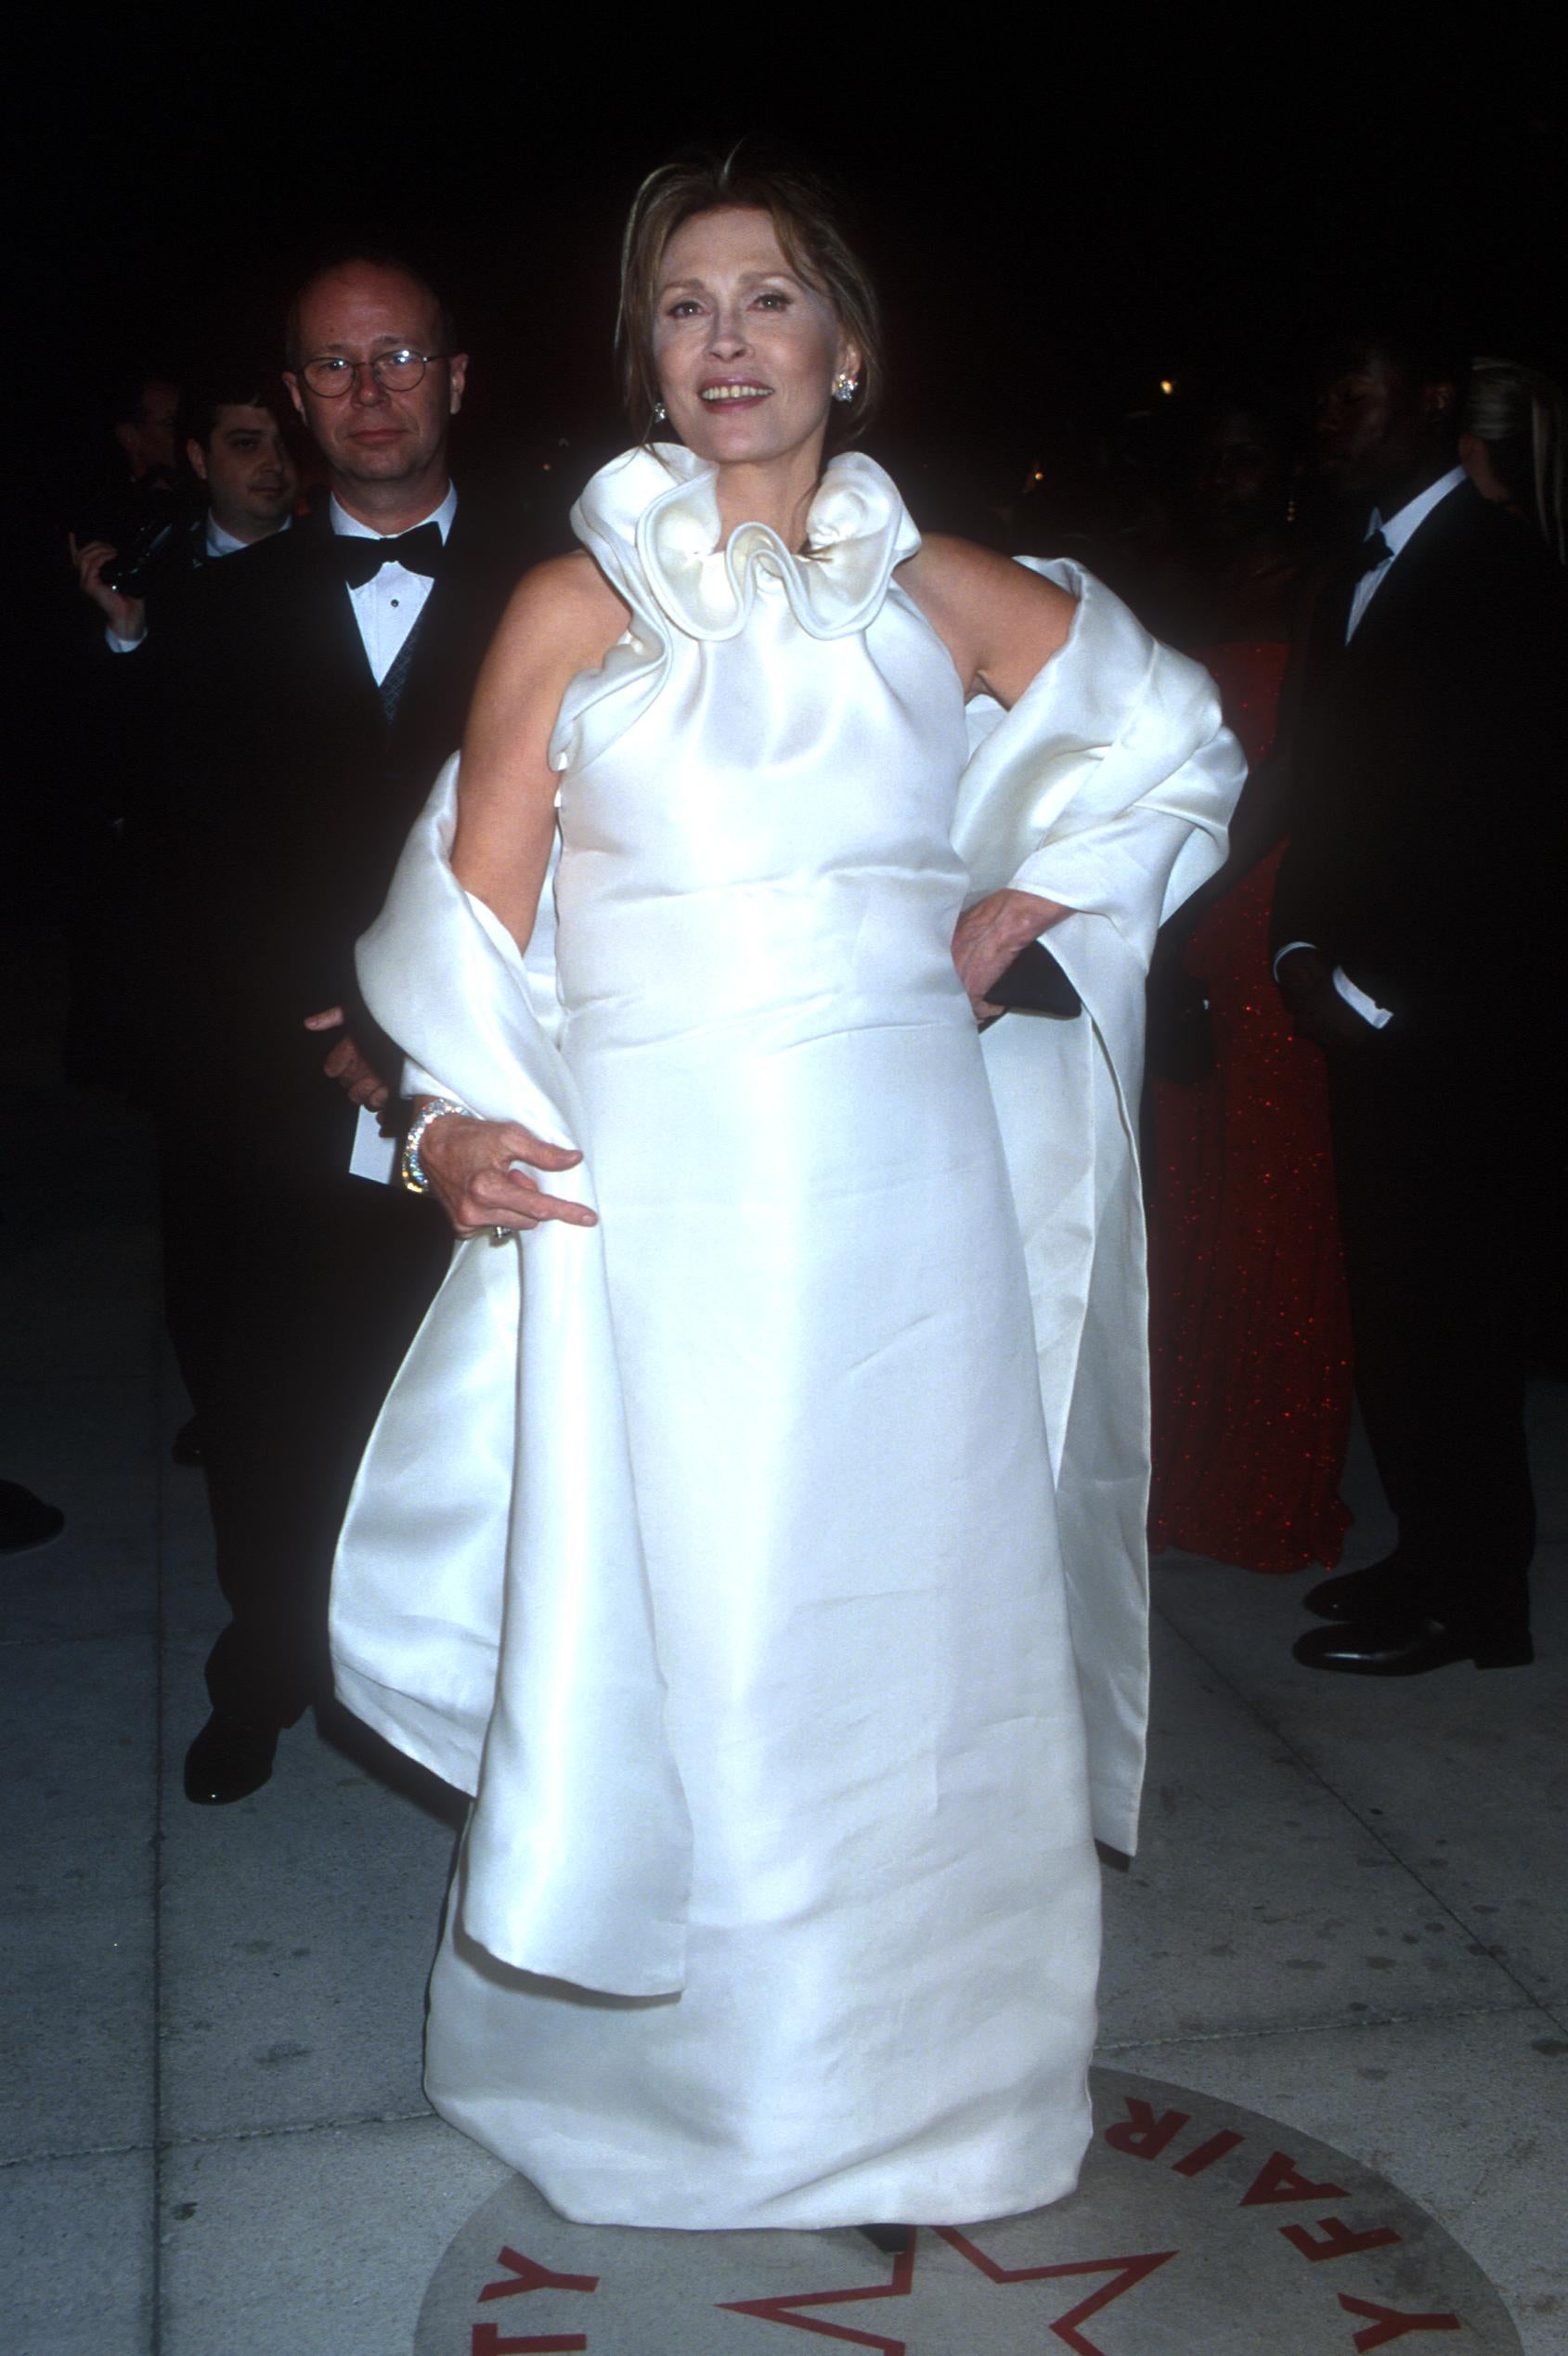 Dunaway at the Vanity Fair Oscars party in 2000